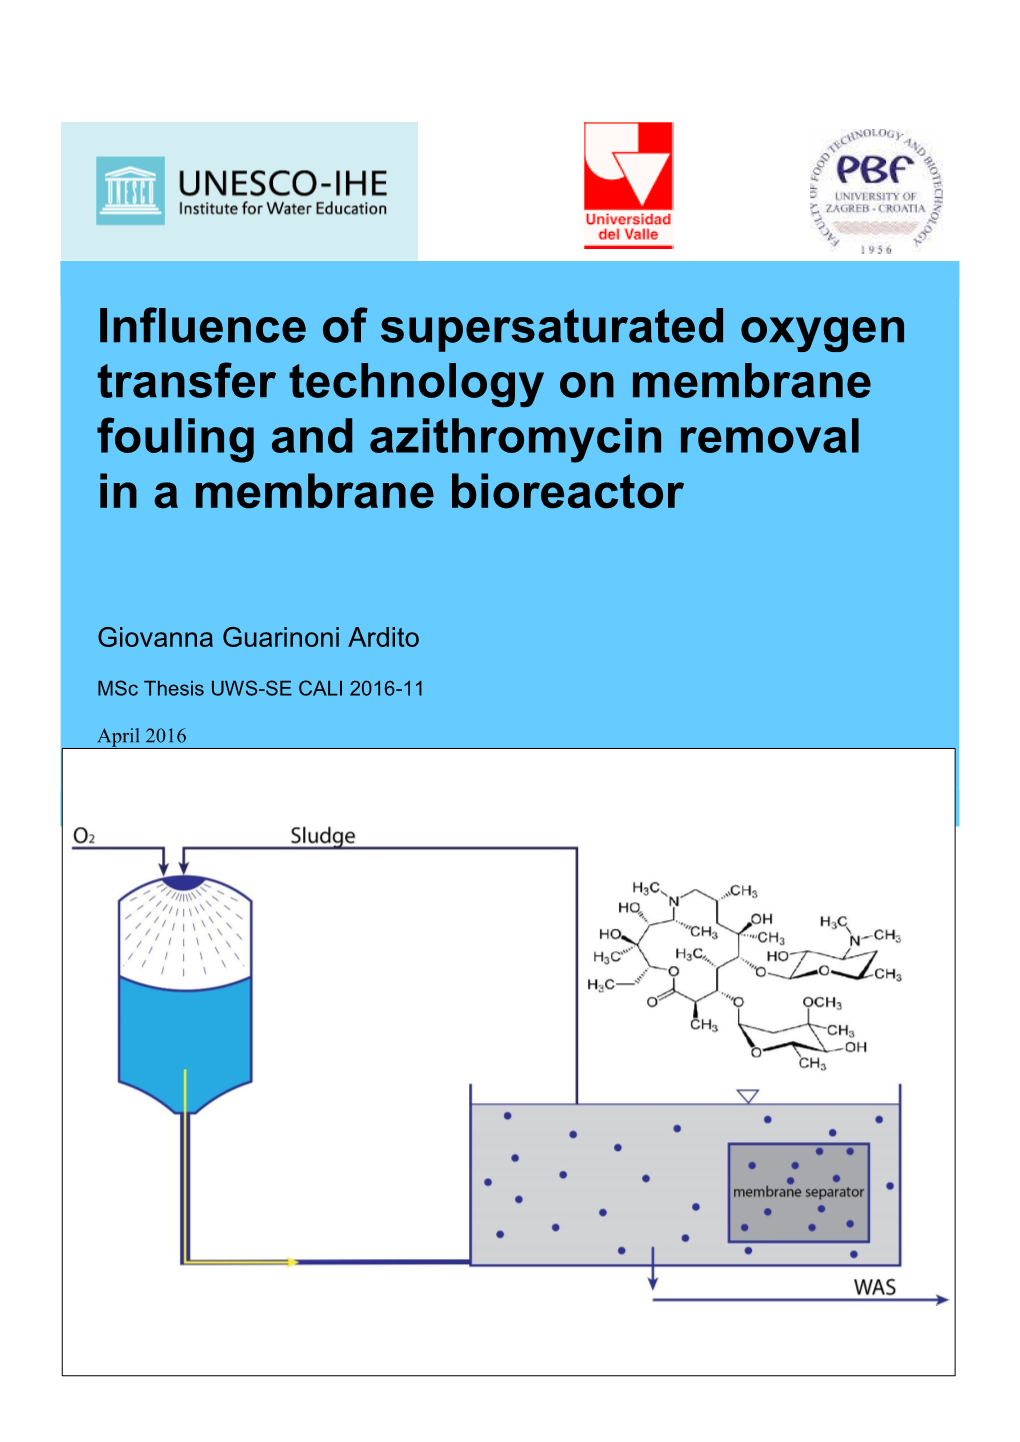 Influence of Supersaturated Oxygen Transfer Technology on Membrane Fouling and Azithromycin Removal in a Membrane Bioreactor